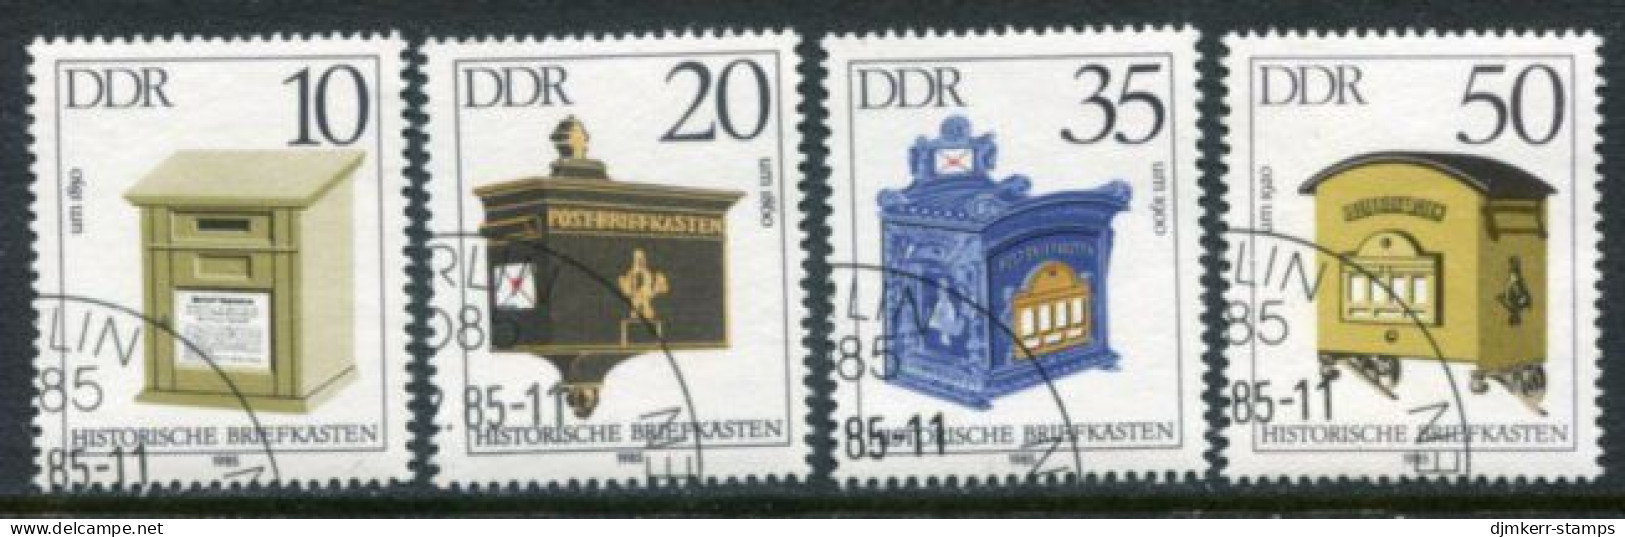 DDR 1985 Histpric Letterboxes Singles Used .  Michel 2924-27 - Gebruikt